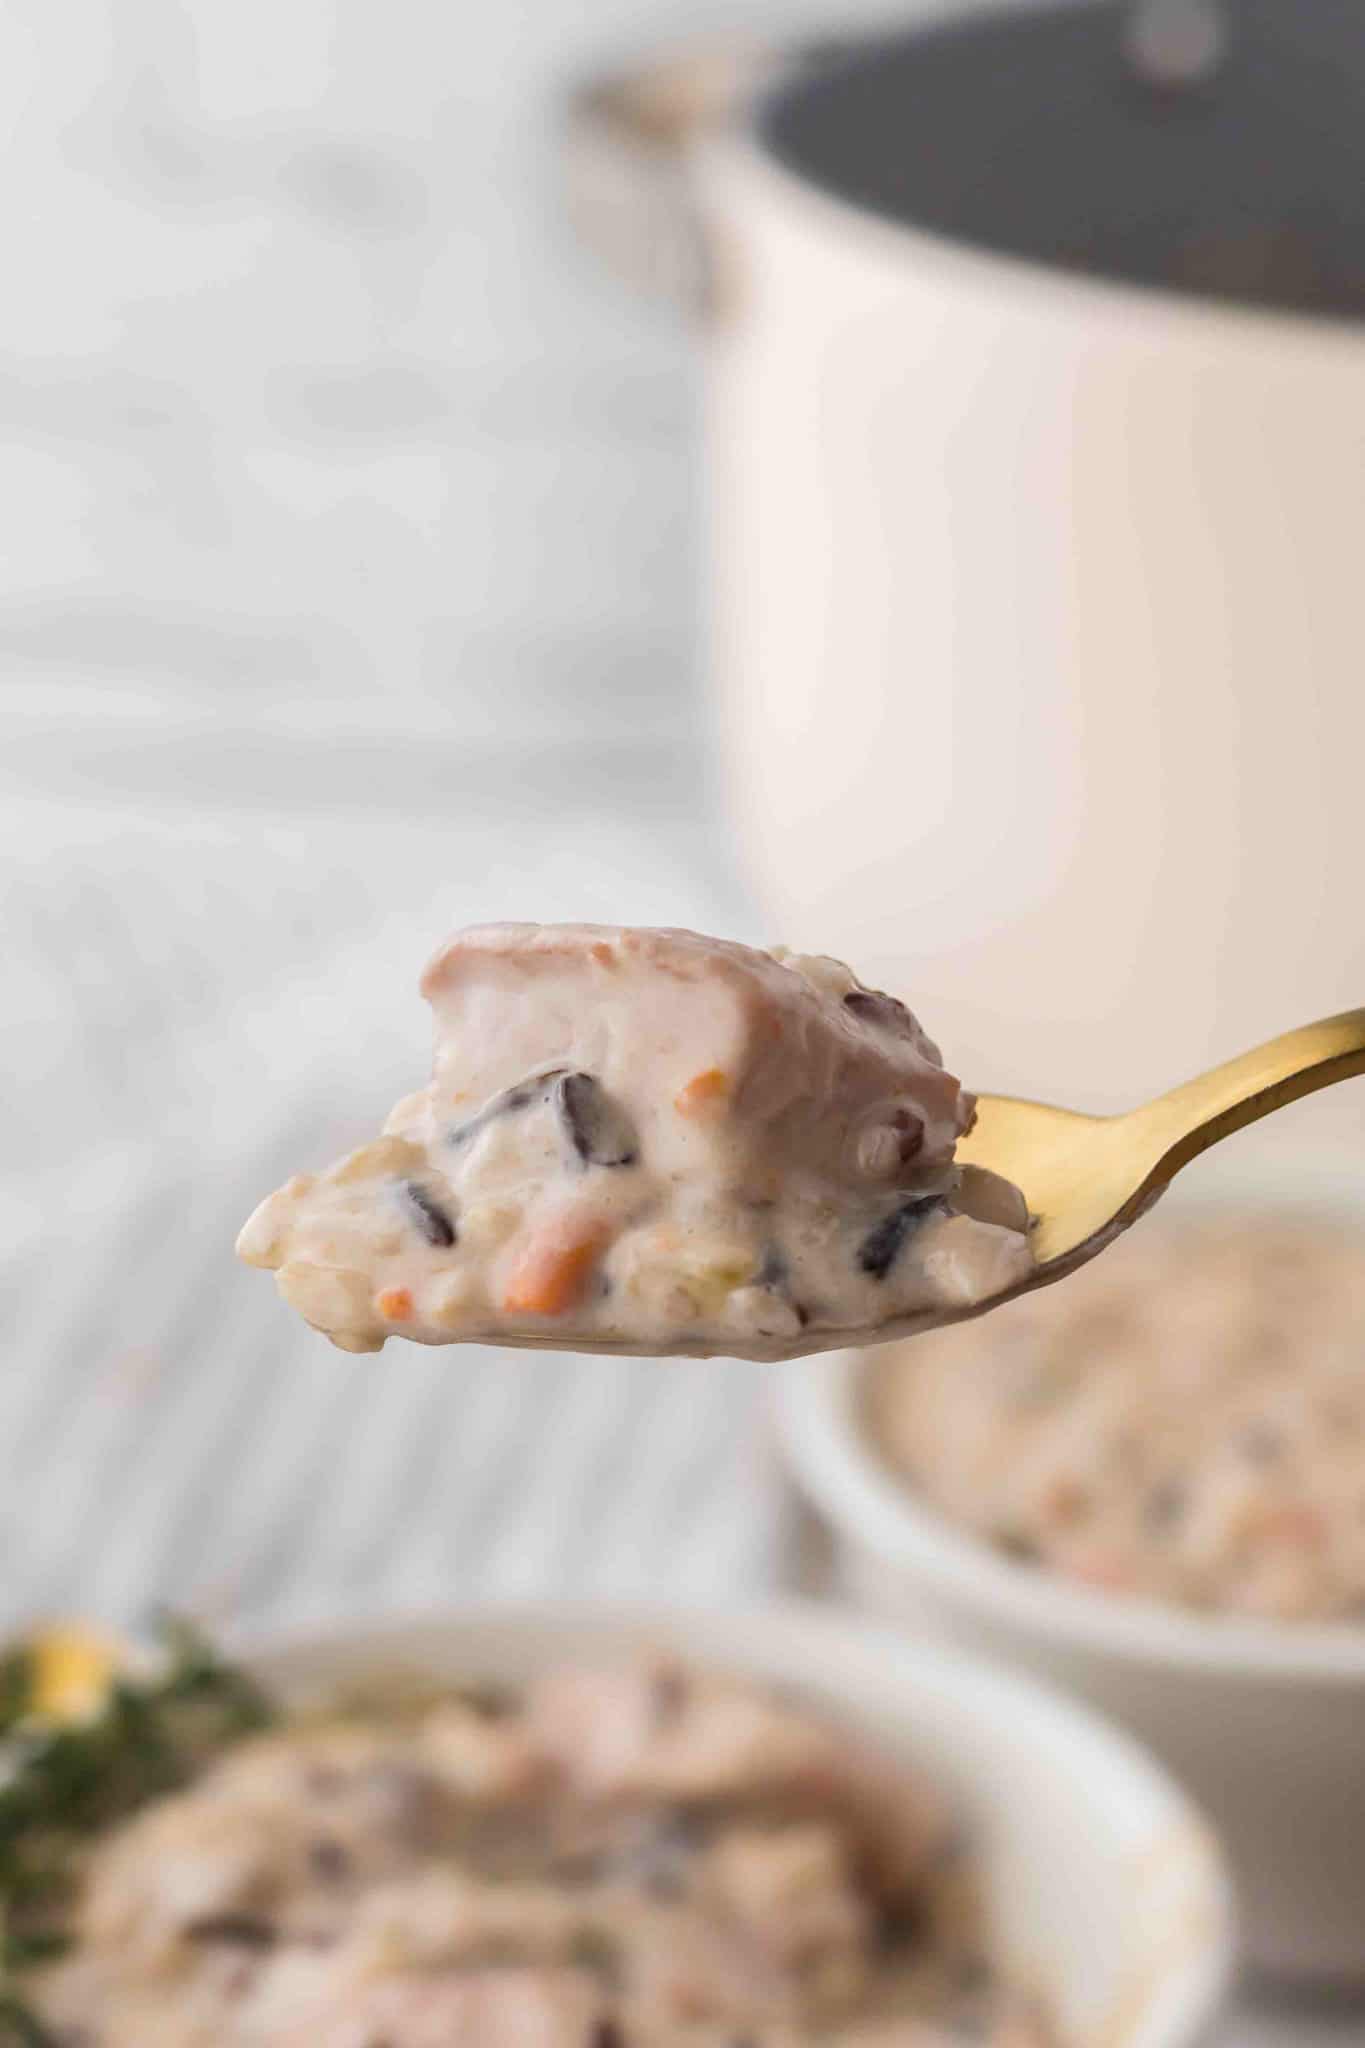 Chicken and Wild Rice Soup is a hearty and creamy soup recipe loaded with chunks of chicken, wild rice, carrots, celery, onions and fresh thyme.